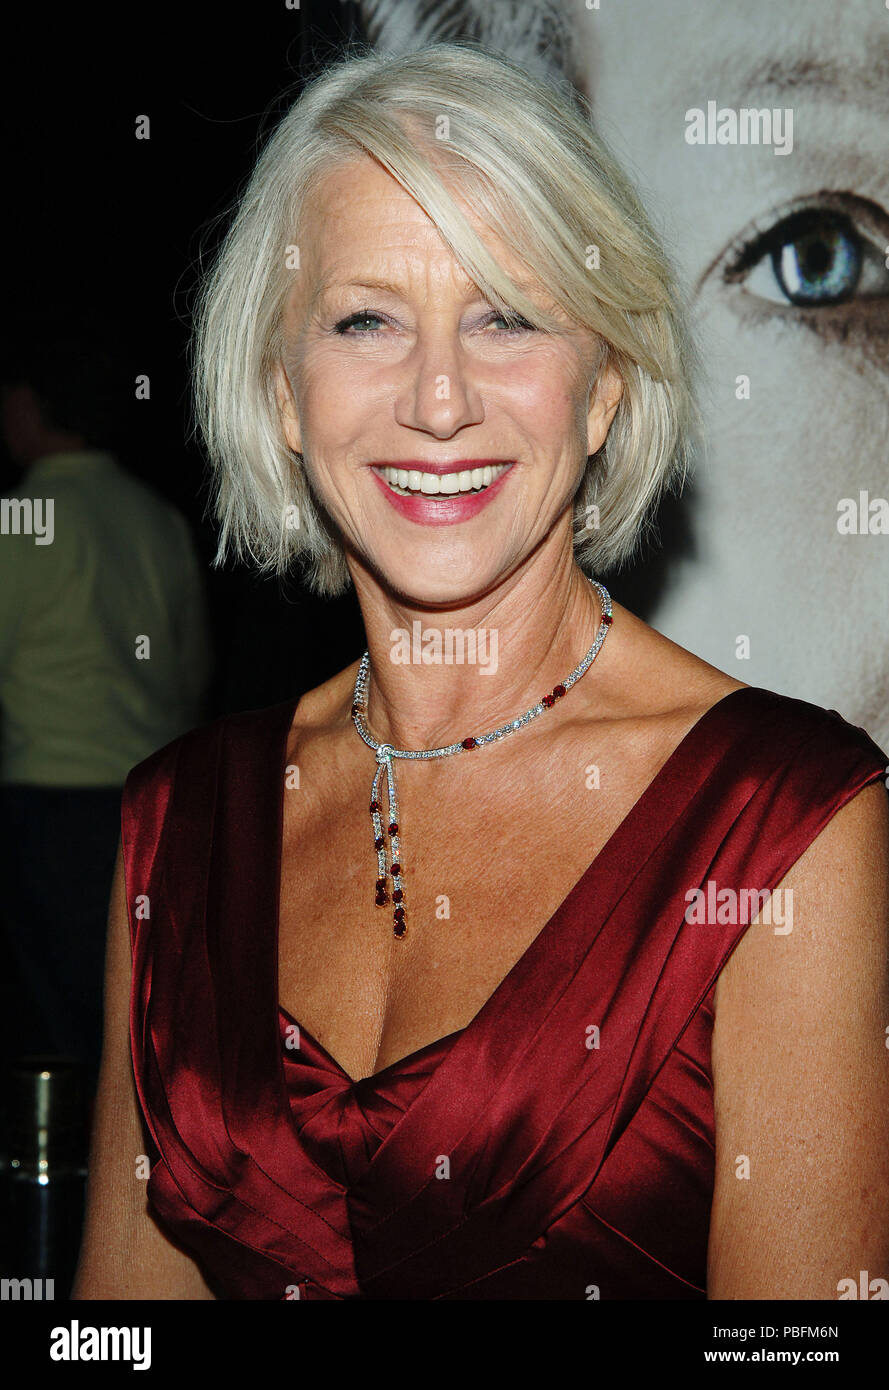 Helen Mirren arriving at THE QUEEN premiere at the Academy Of Motion Pictures & Science  In Los Angeles.  headshot smile eye contact 01 MirrenHelen01 Red Carpet Event, Vertical, USA, Film Industry, Celebrities,  Photography, Bestof, Arts Culture and Entertainment, Topix Celebrities fashion /  Vertical, Best of, Event in Hollywood Life - California,  Red Carpet and backstage, USA, Film Industry, Celebrities,  movie celebrities, TV celebrities, Music celebrities, Photography, Bestof, Arts Culture and Entertainment,  Topix, headshot, vertical, one person,, from the year , 2006, inquiry tsuni@Gamm Stock Photo